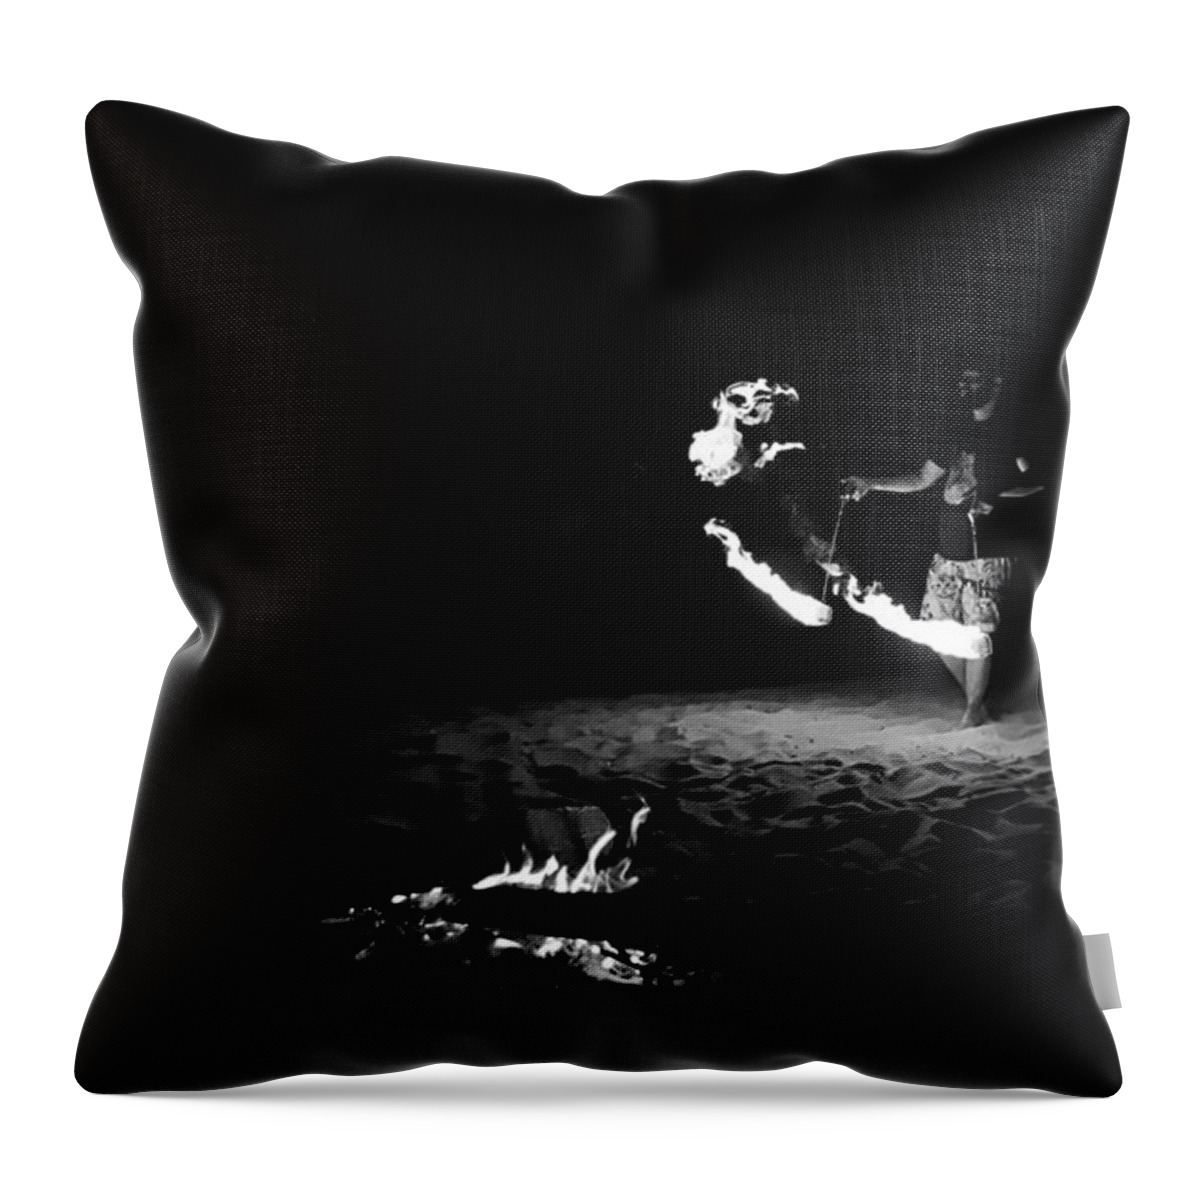 T50yp Throw Pillow featuring the photograph Fire Poi XIII by Nicholas Miller